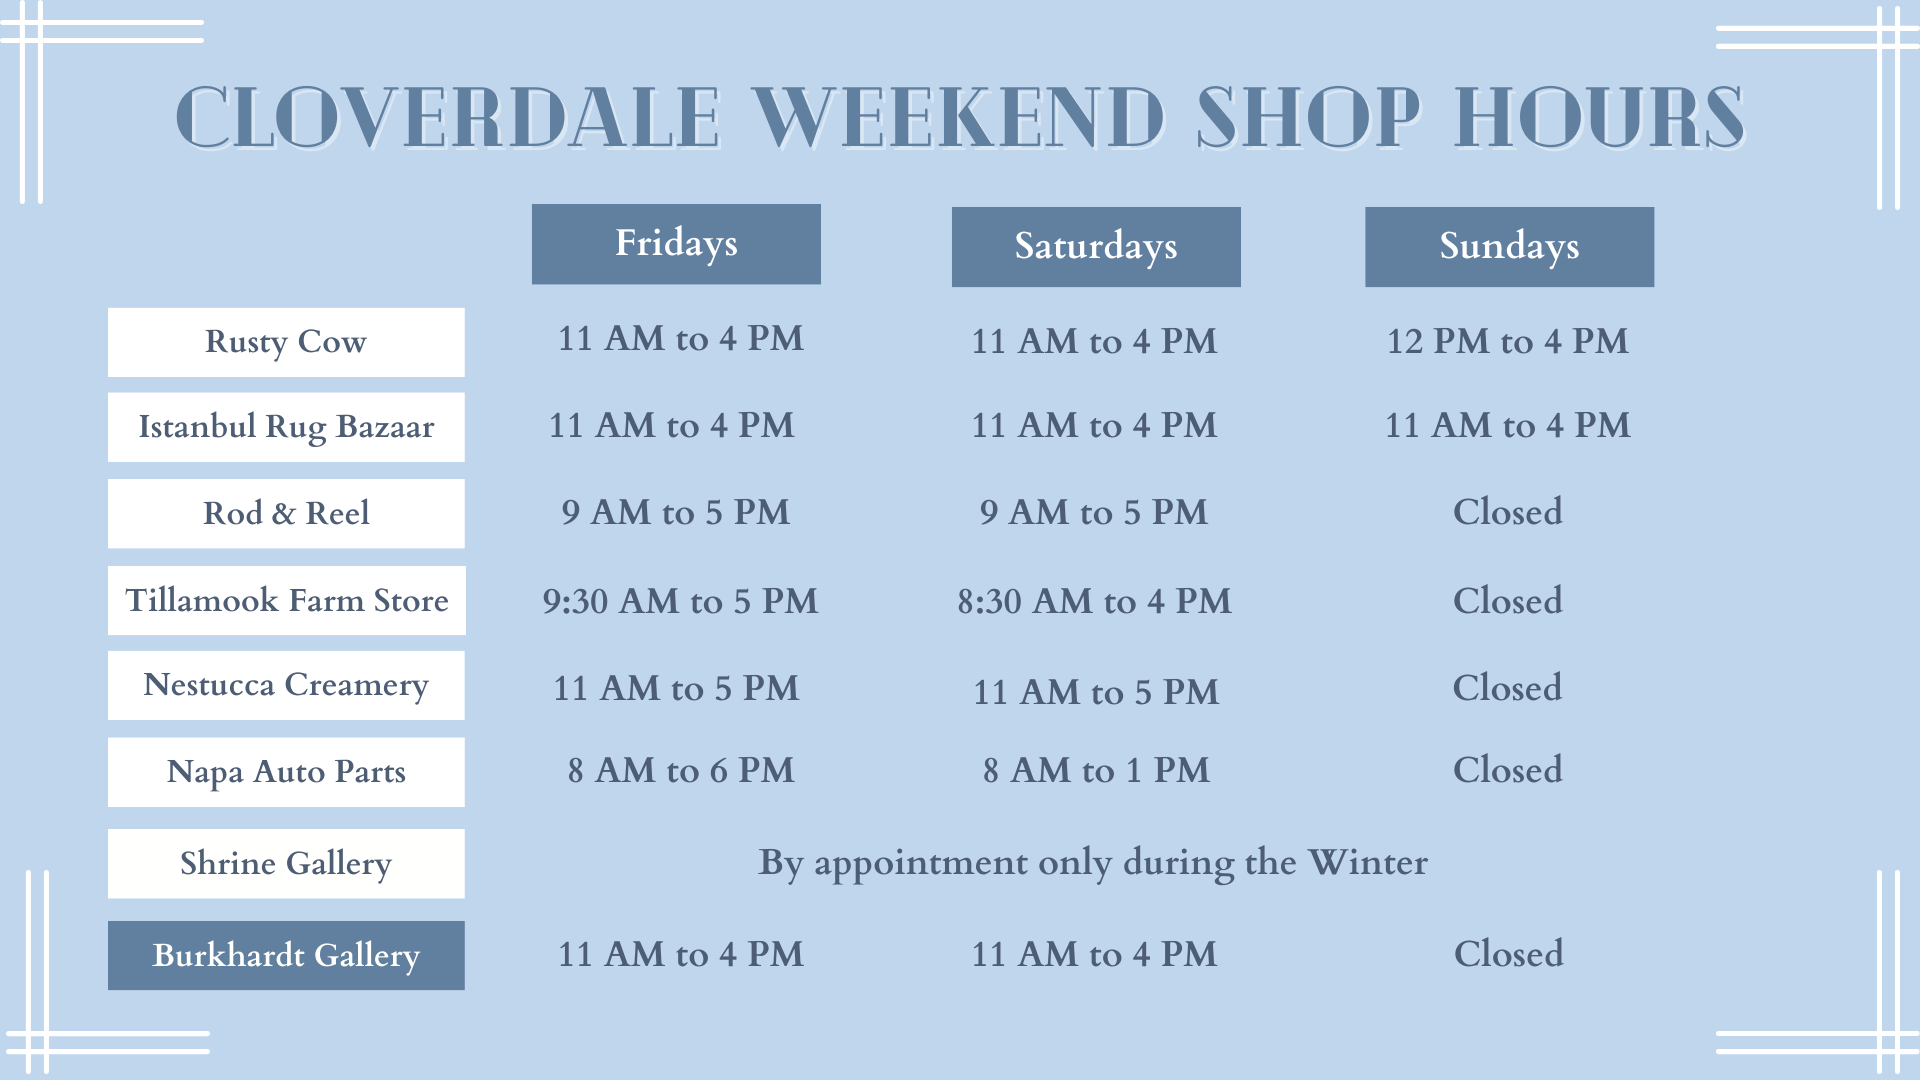 Cloverdale Oregon Shops and Hours Weekends